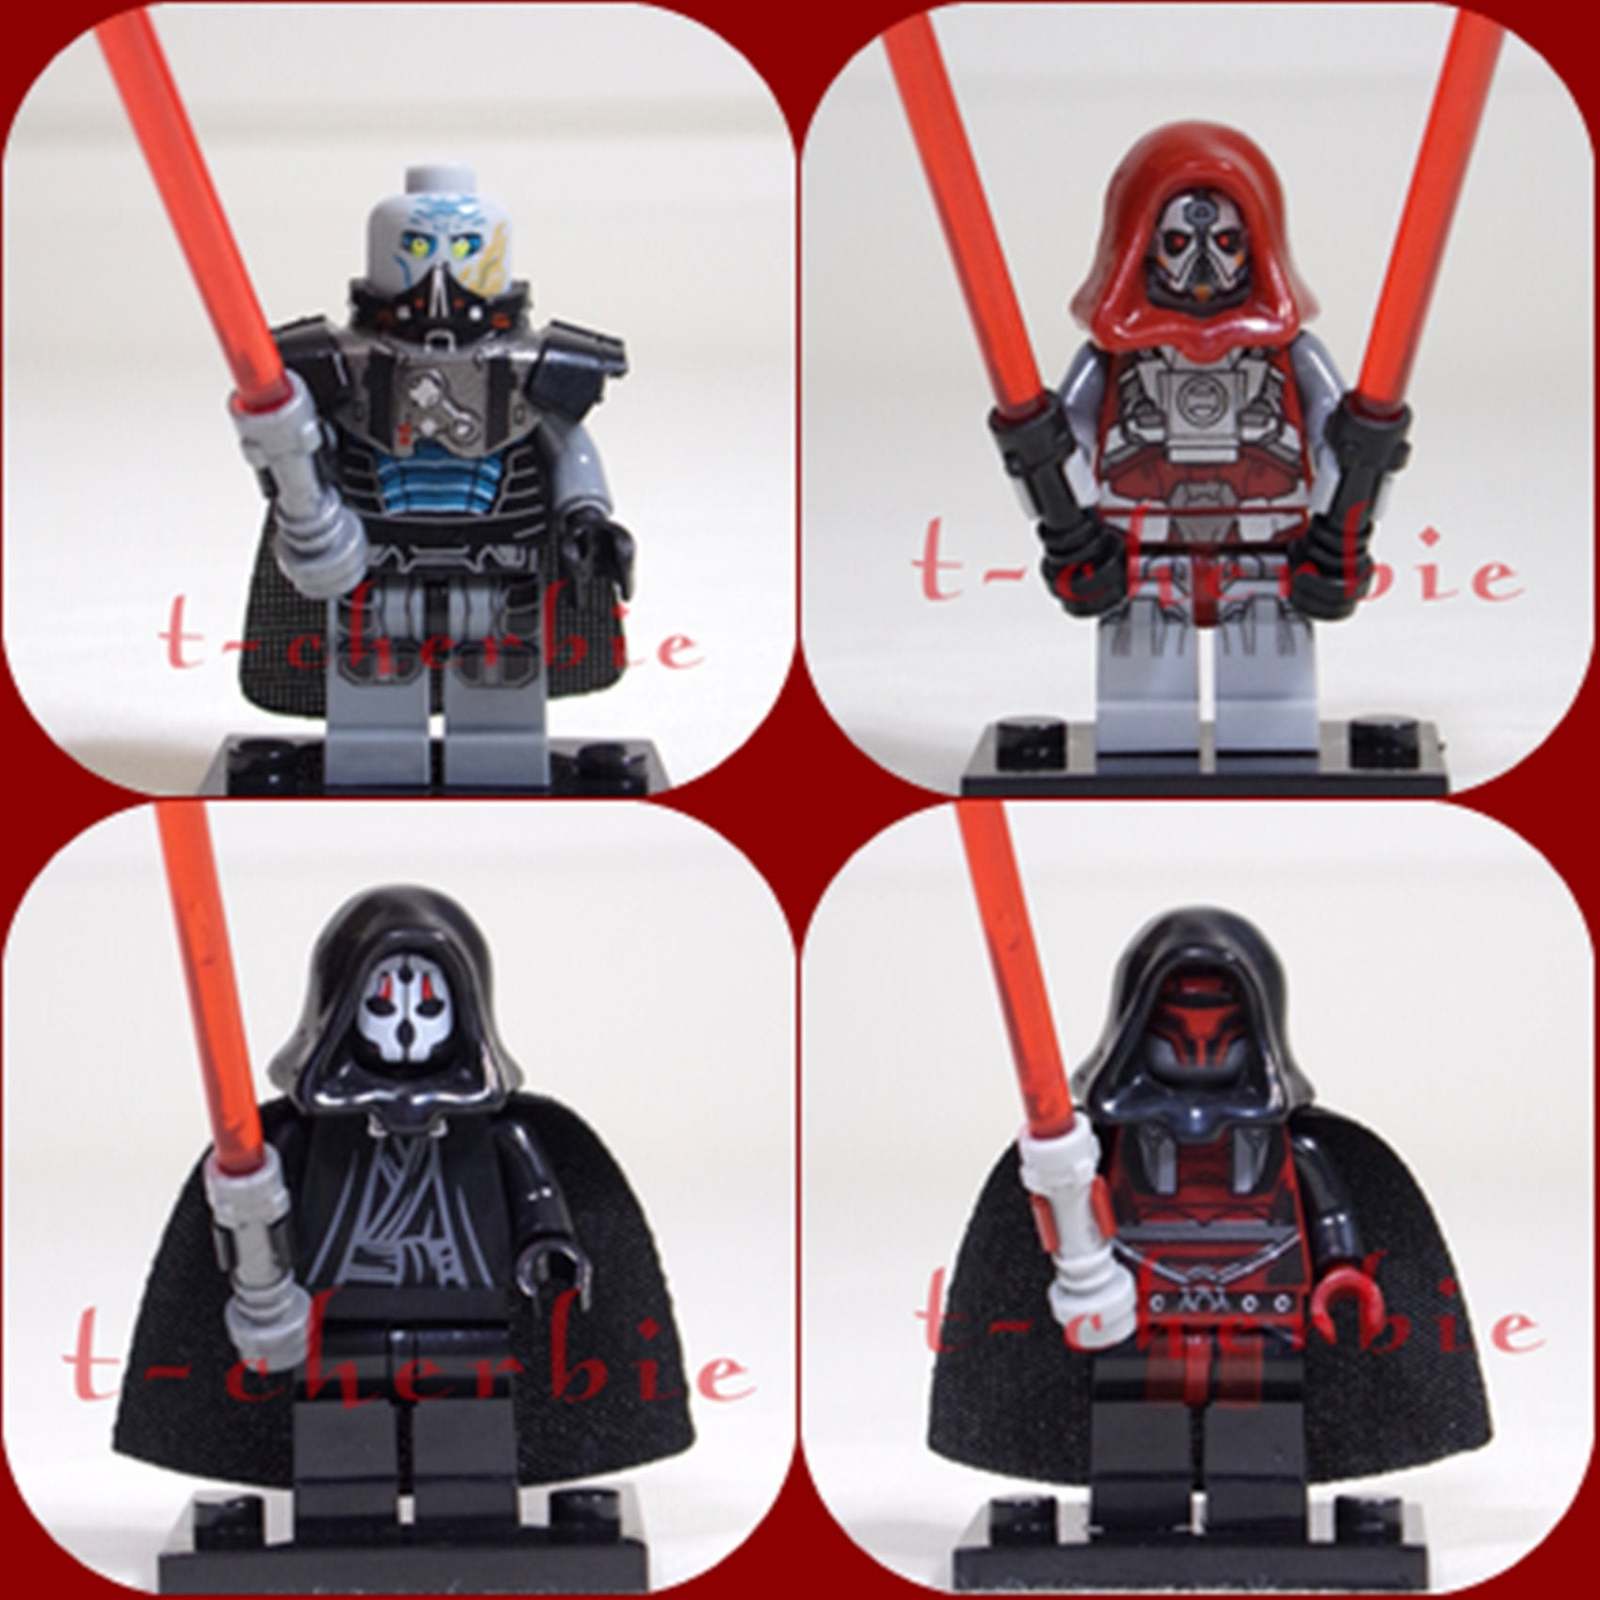 lego-star-wars-minifigures-lot-sith-troopers-weapons-darth-marr-lego